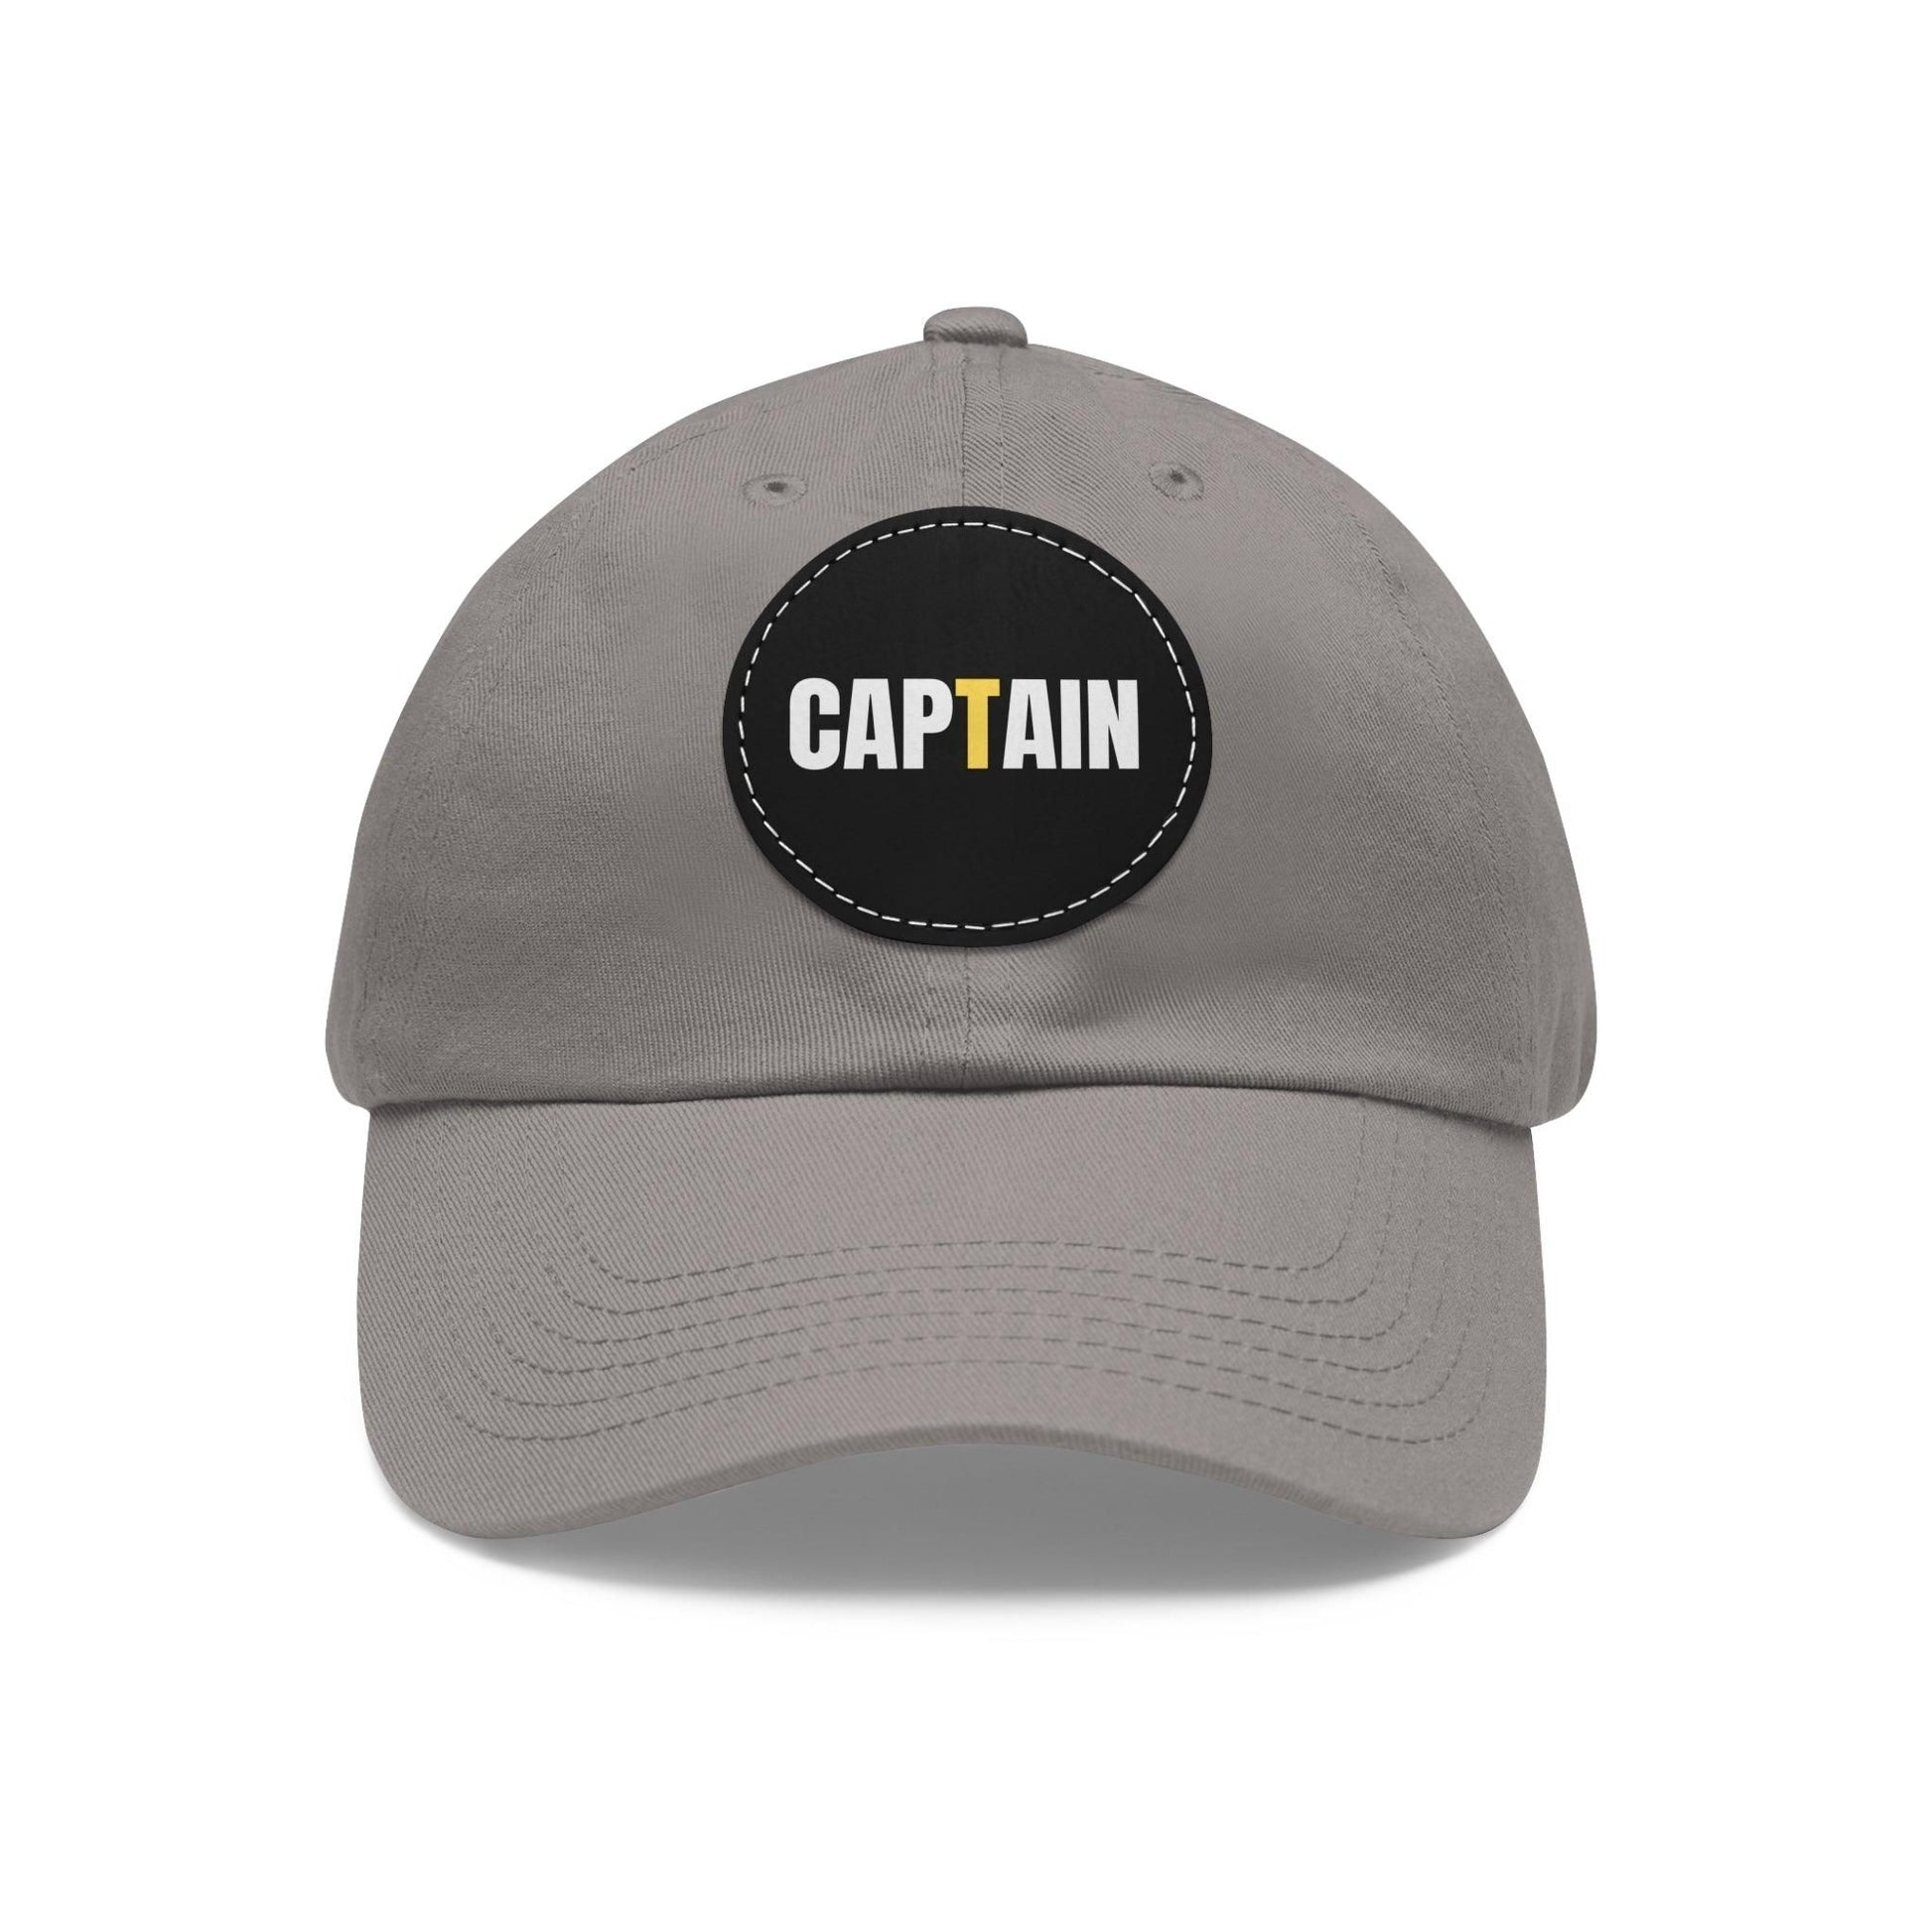 Captain Baseball Hat with Leather Patch Cap Grey / Black patch Circle One size